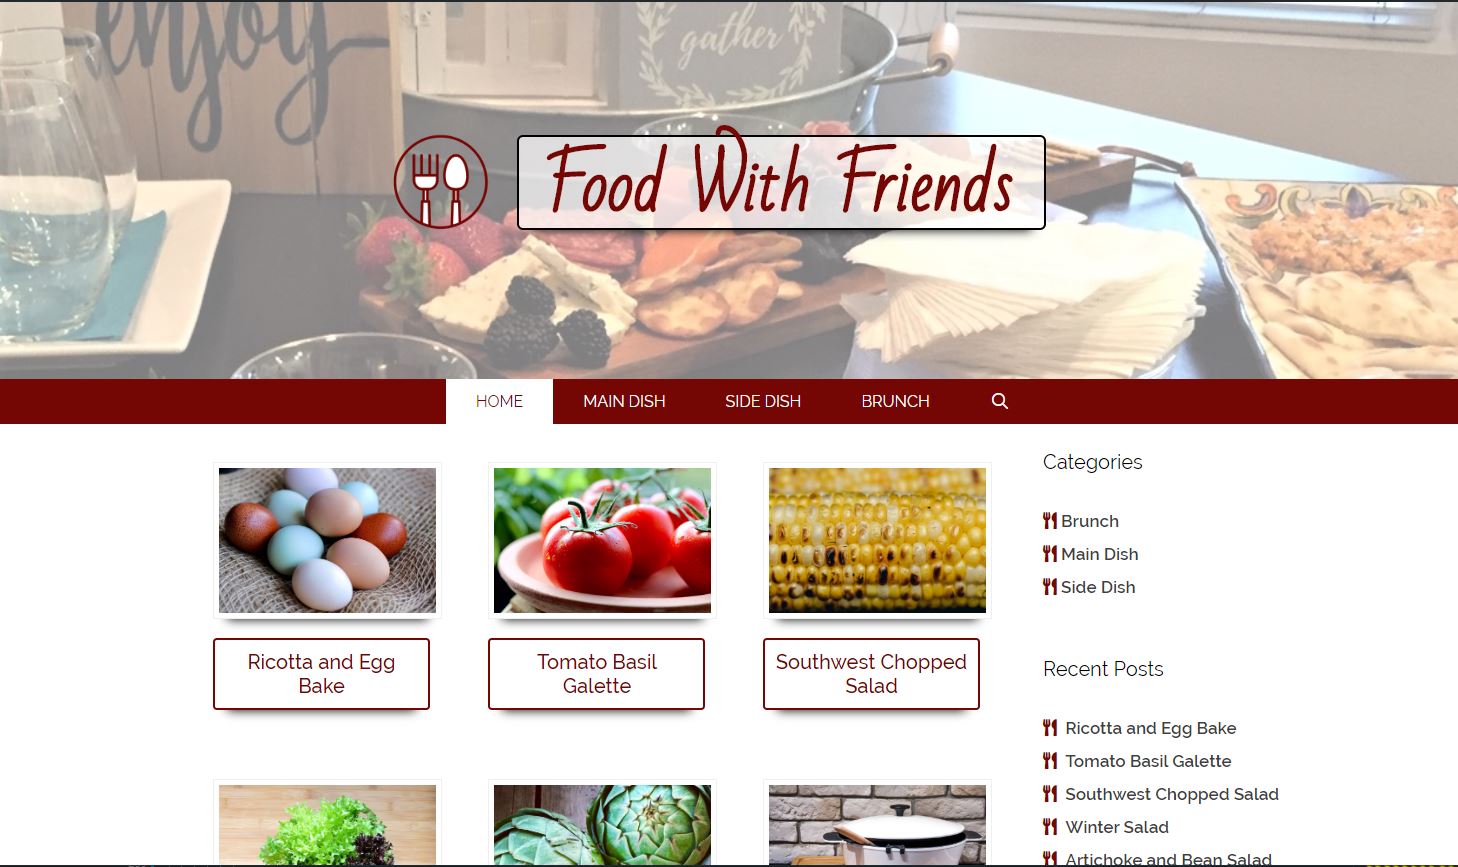 Food With Friends home page screenshot